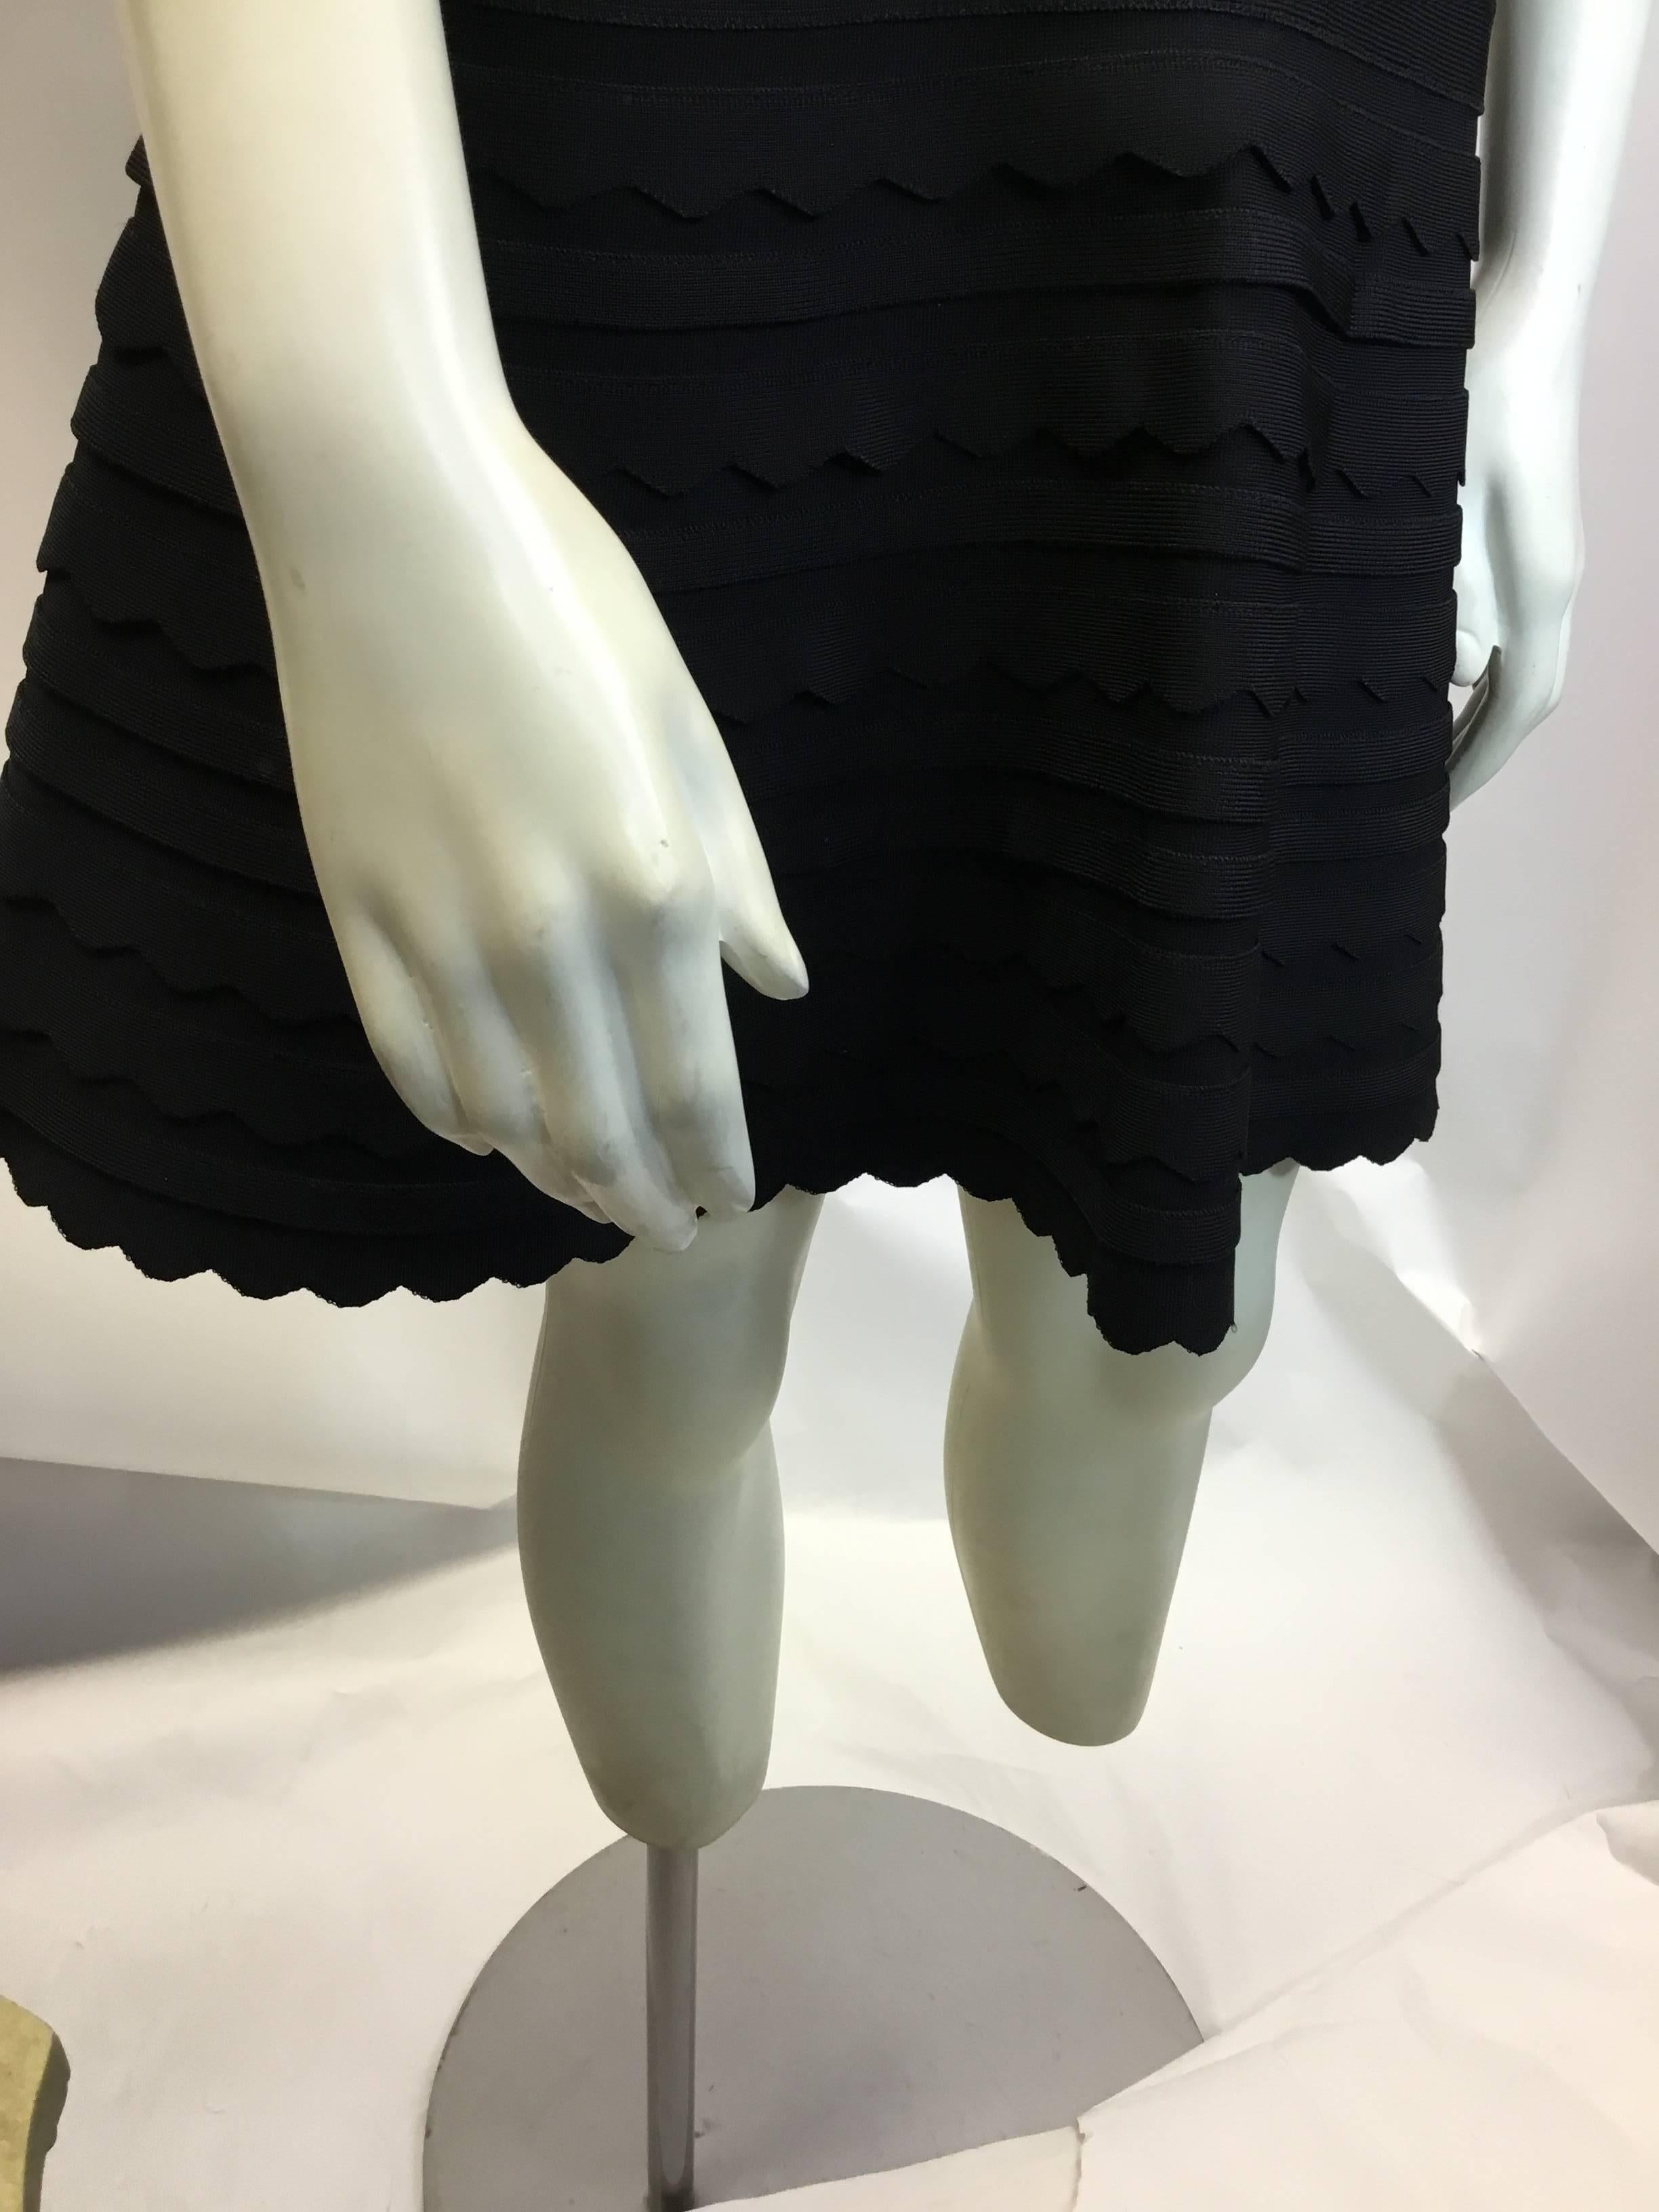 Herve Leger Black Strapless Scalloped Dress In Excellent Condition For Sale In Narberth, PA